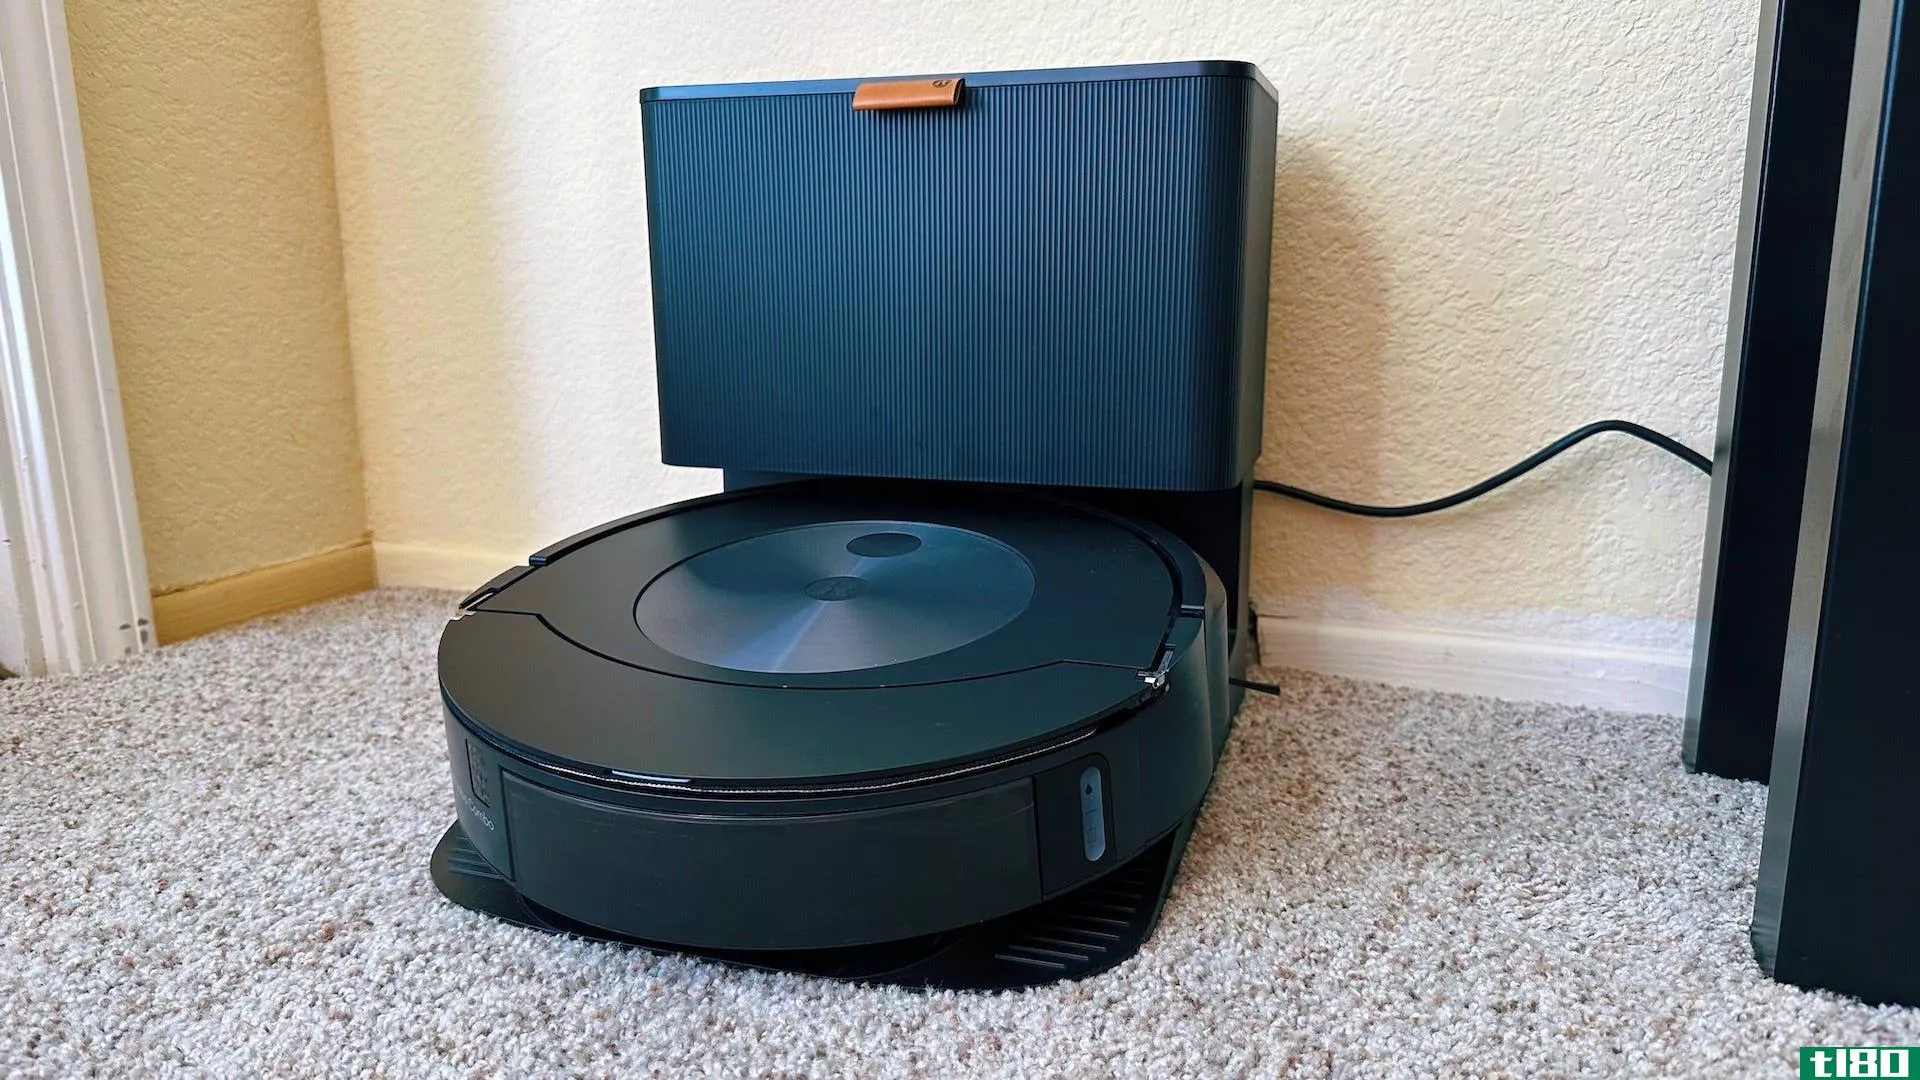 iRobot Roomba Combo j7+ Review: Cleans Well but Lacks Some Advanced Features